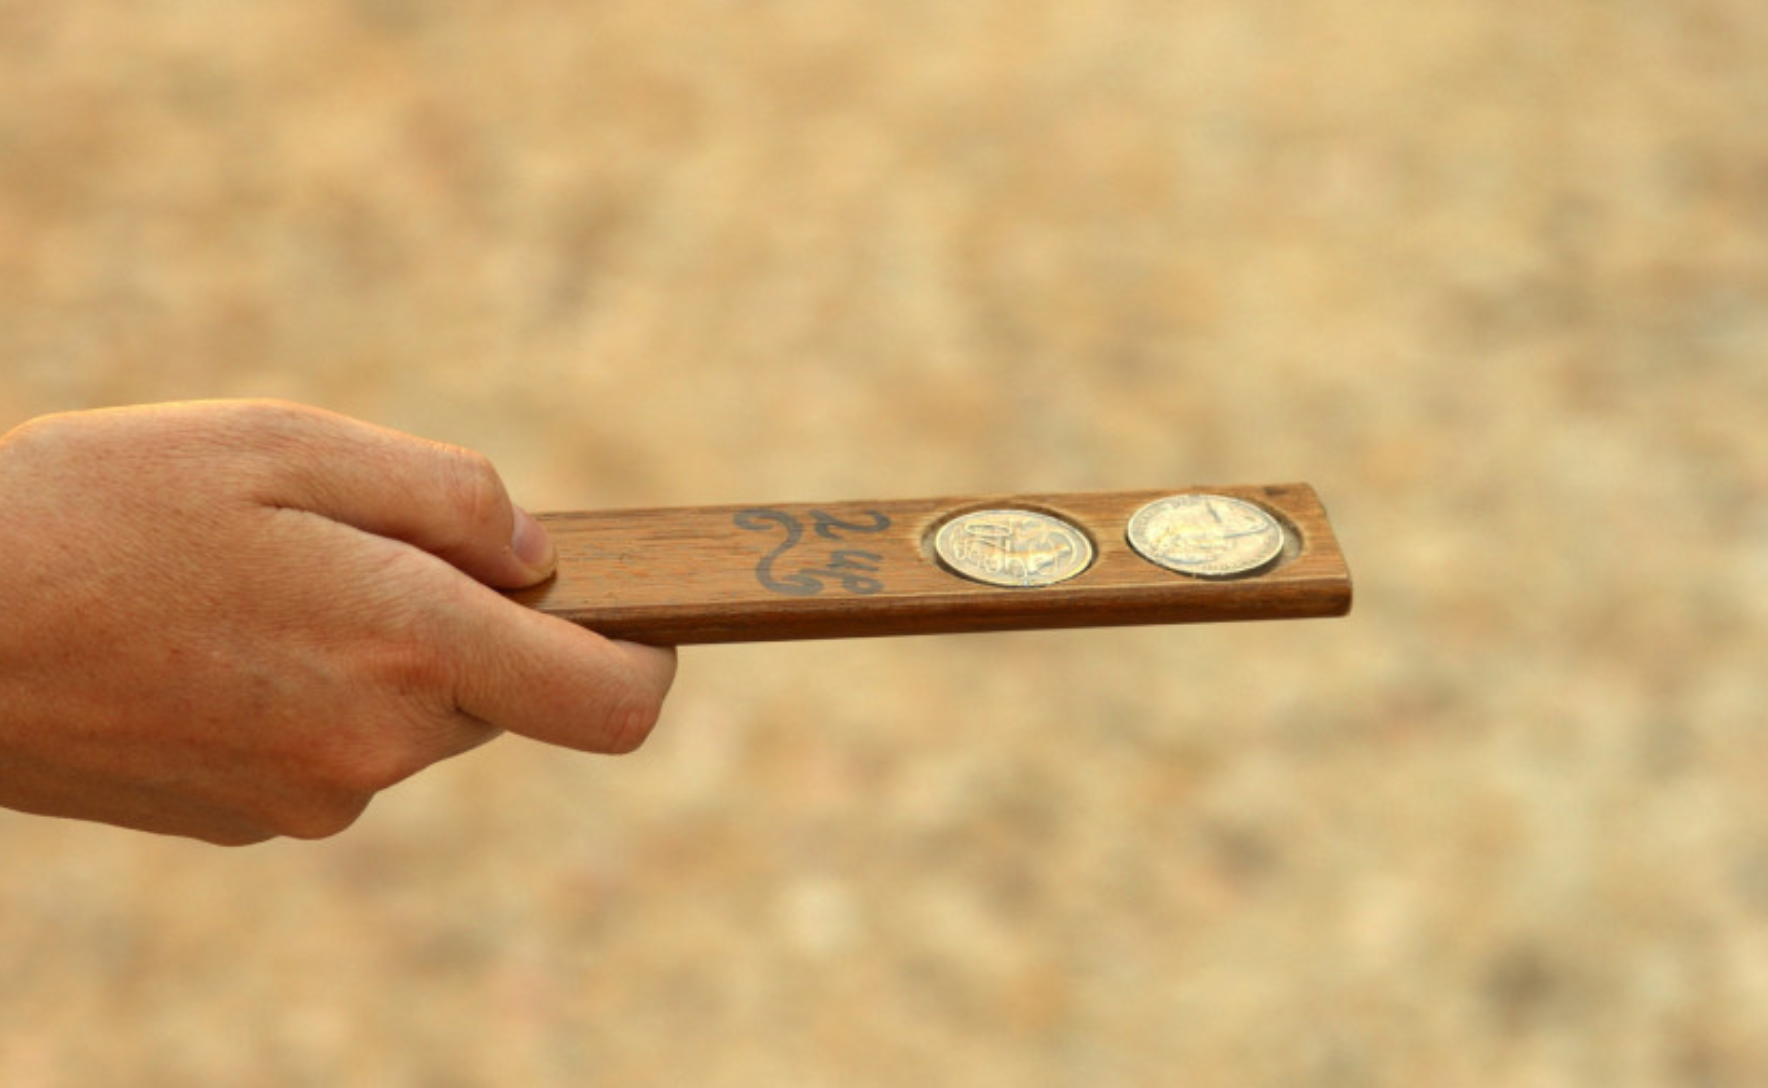 Person's hand holds a two up paddle with two 20 cent coins resting on it.